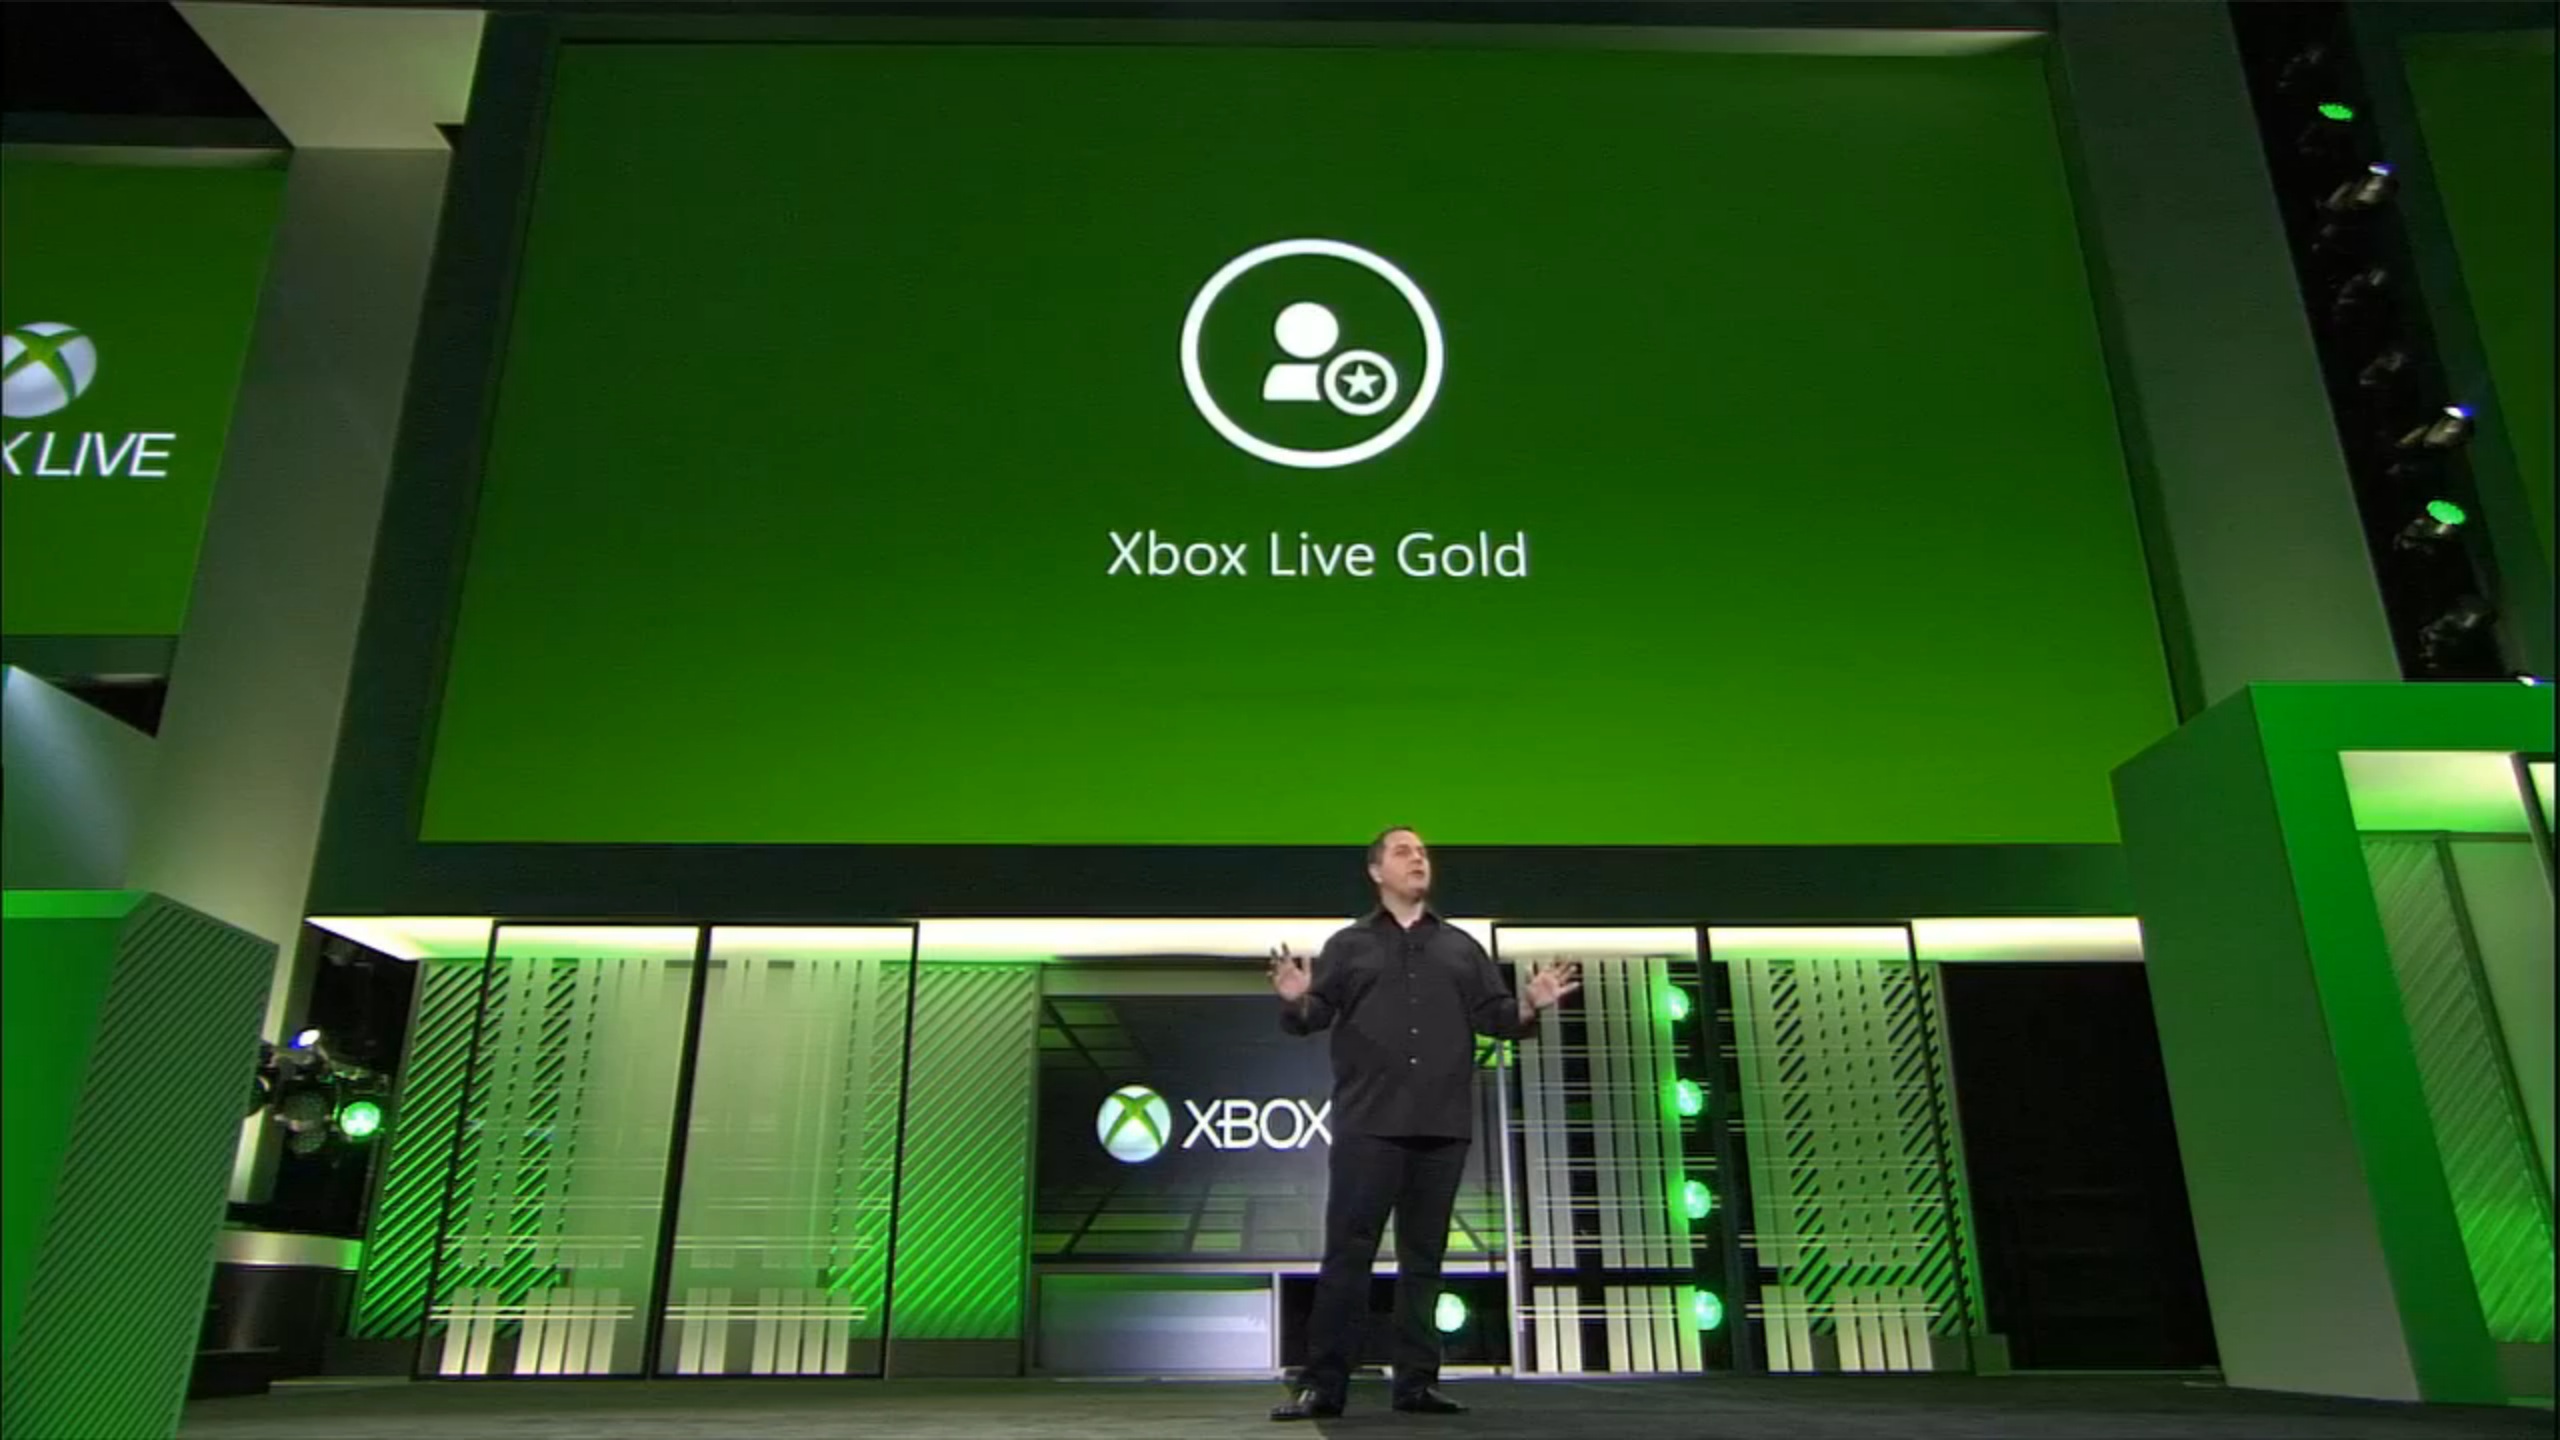 Xbox Live Gold Tied To Console, Not Just Gamertag - Xbox One E3 2013 , HD Wallpaper & Backgrounds